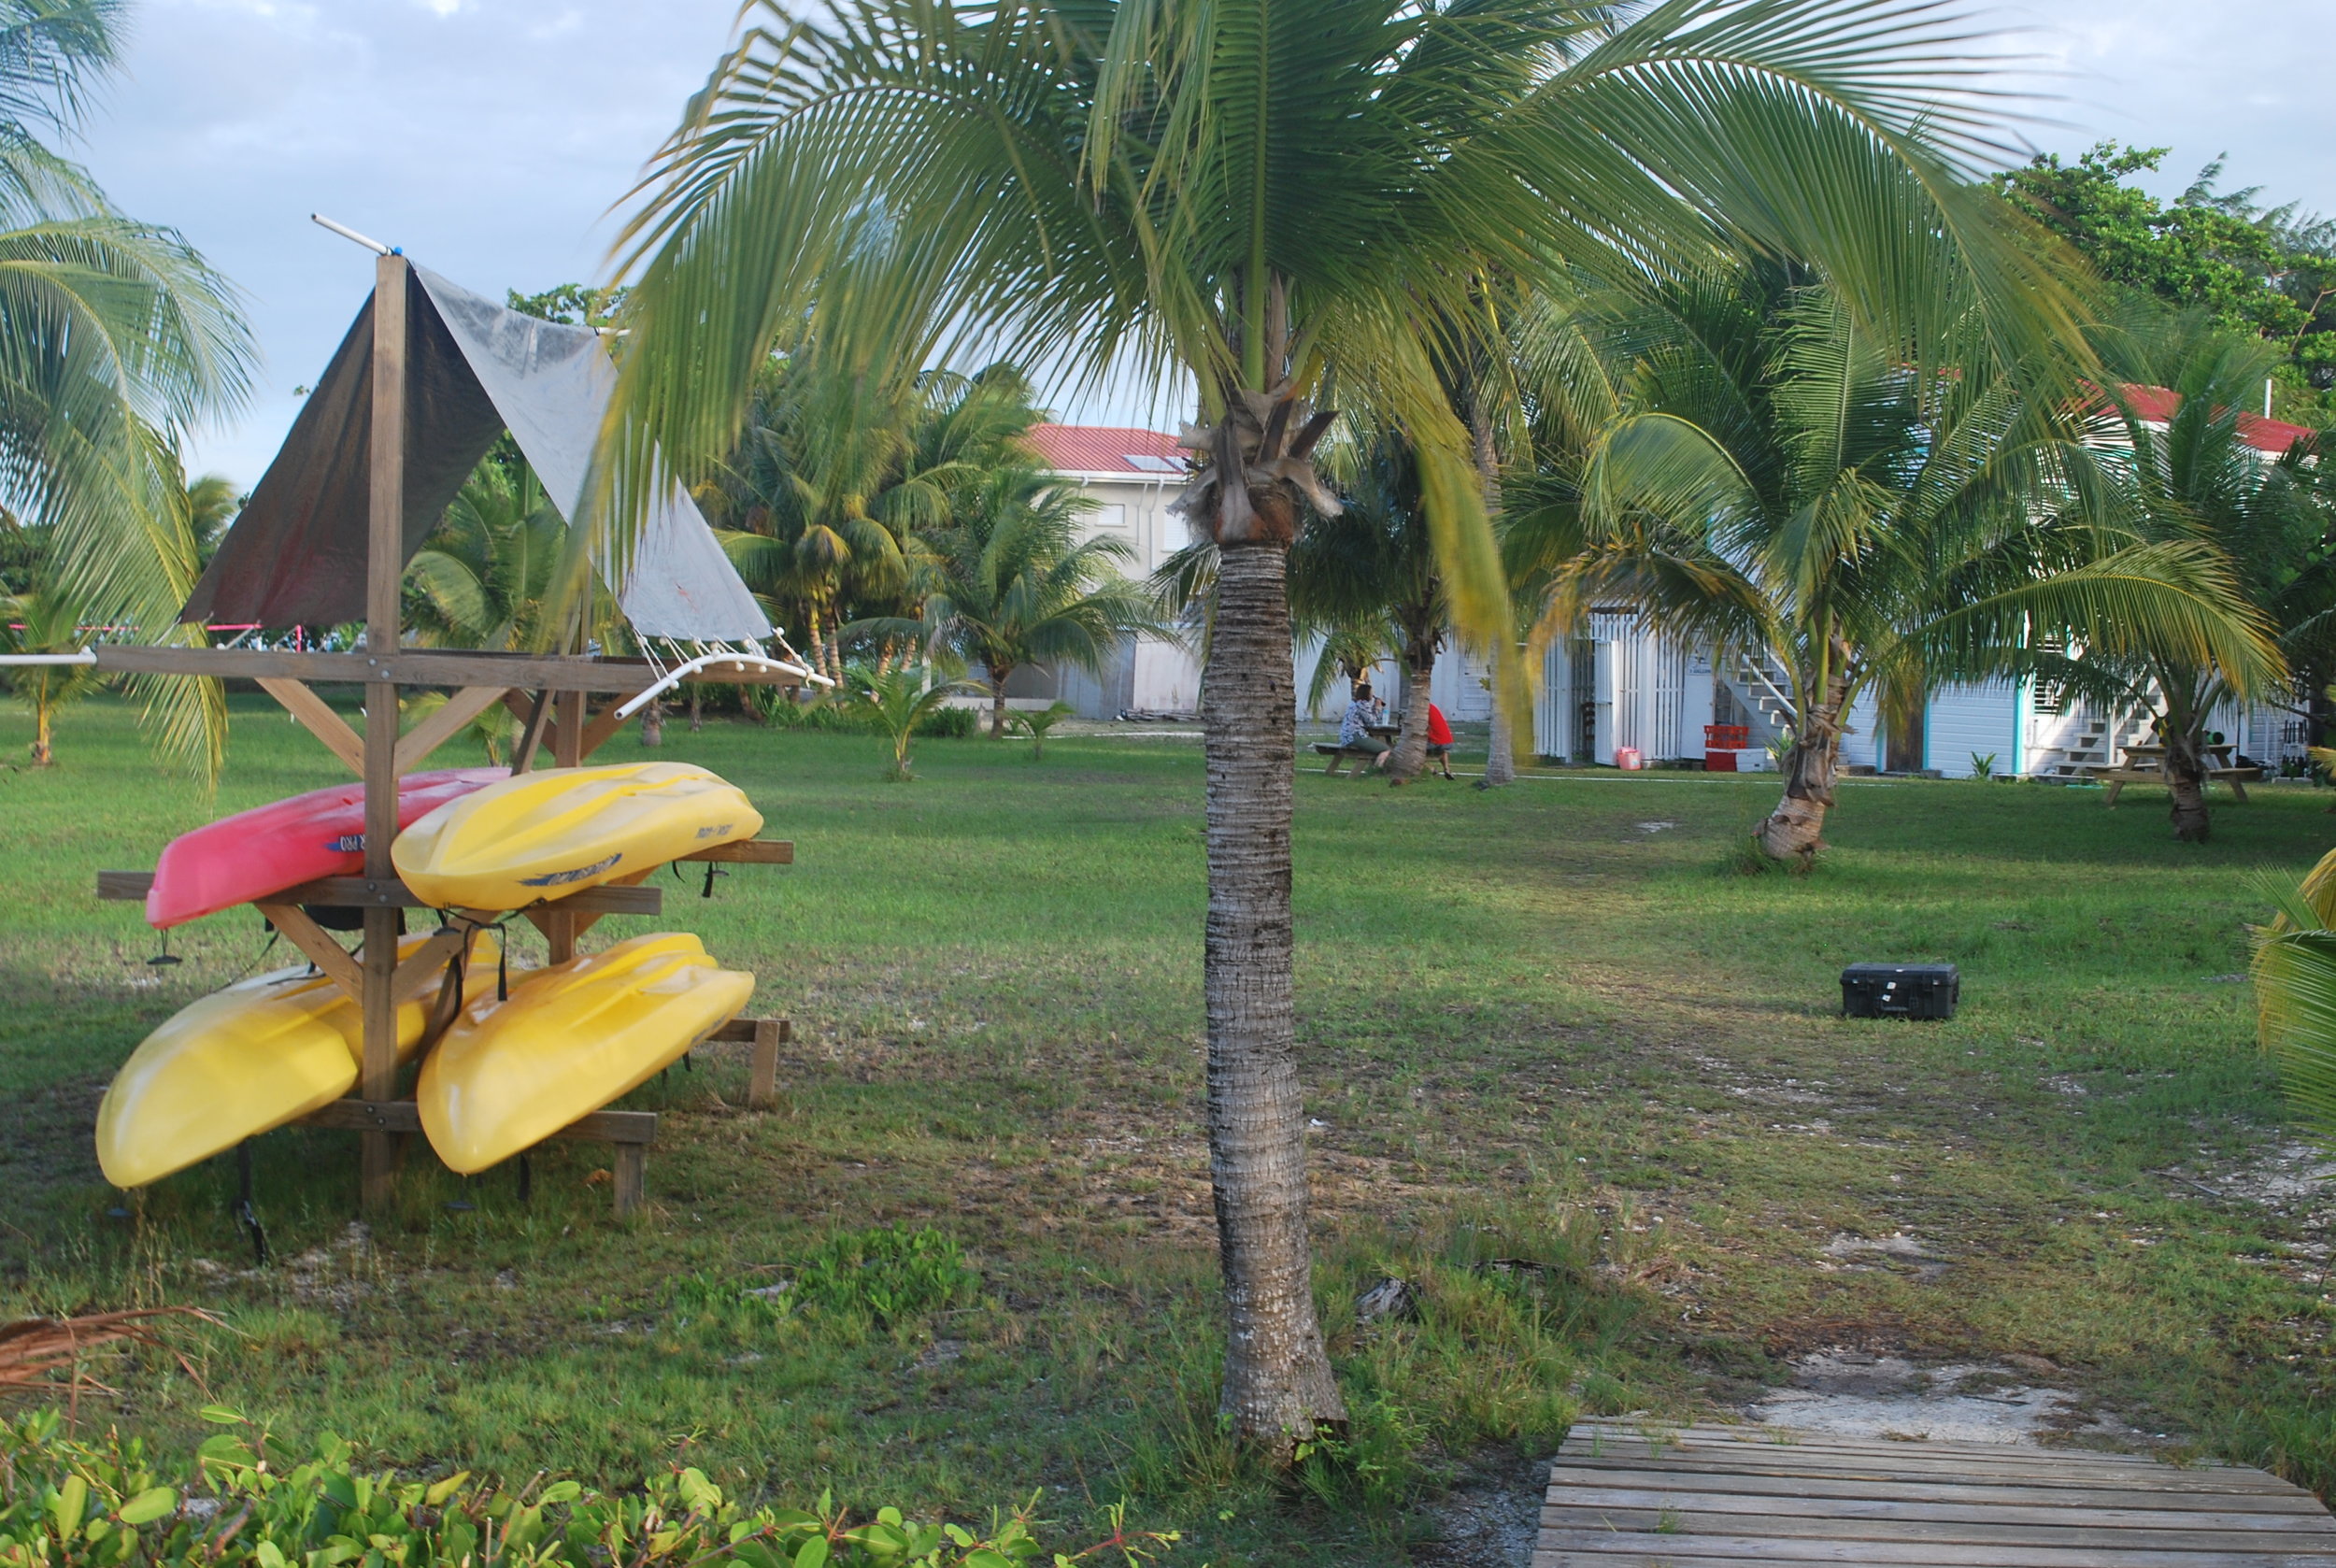 In between activities, take out a kayak to explore the waters around St. George's Caye